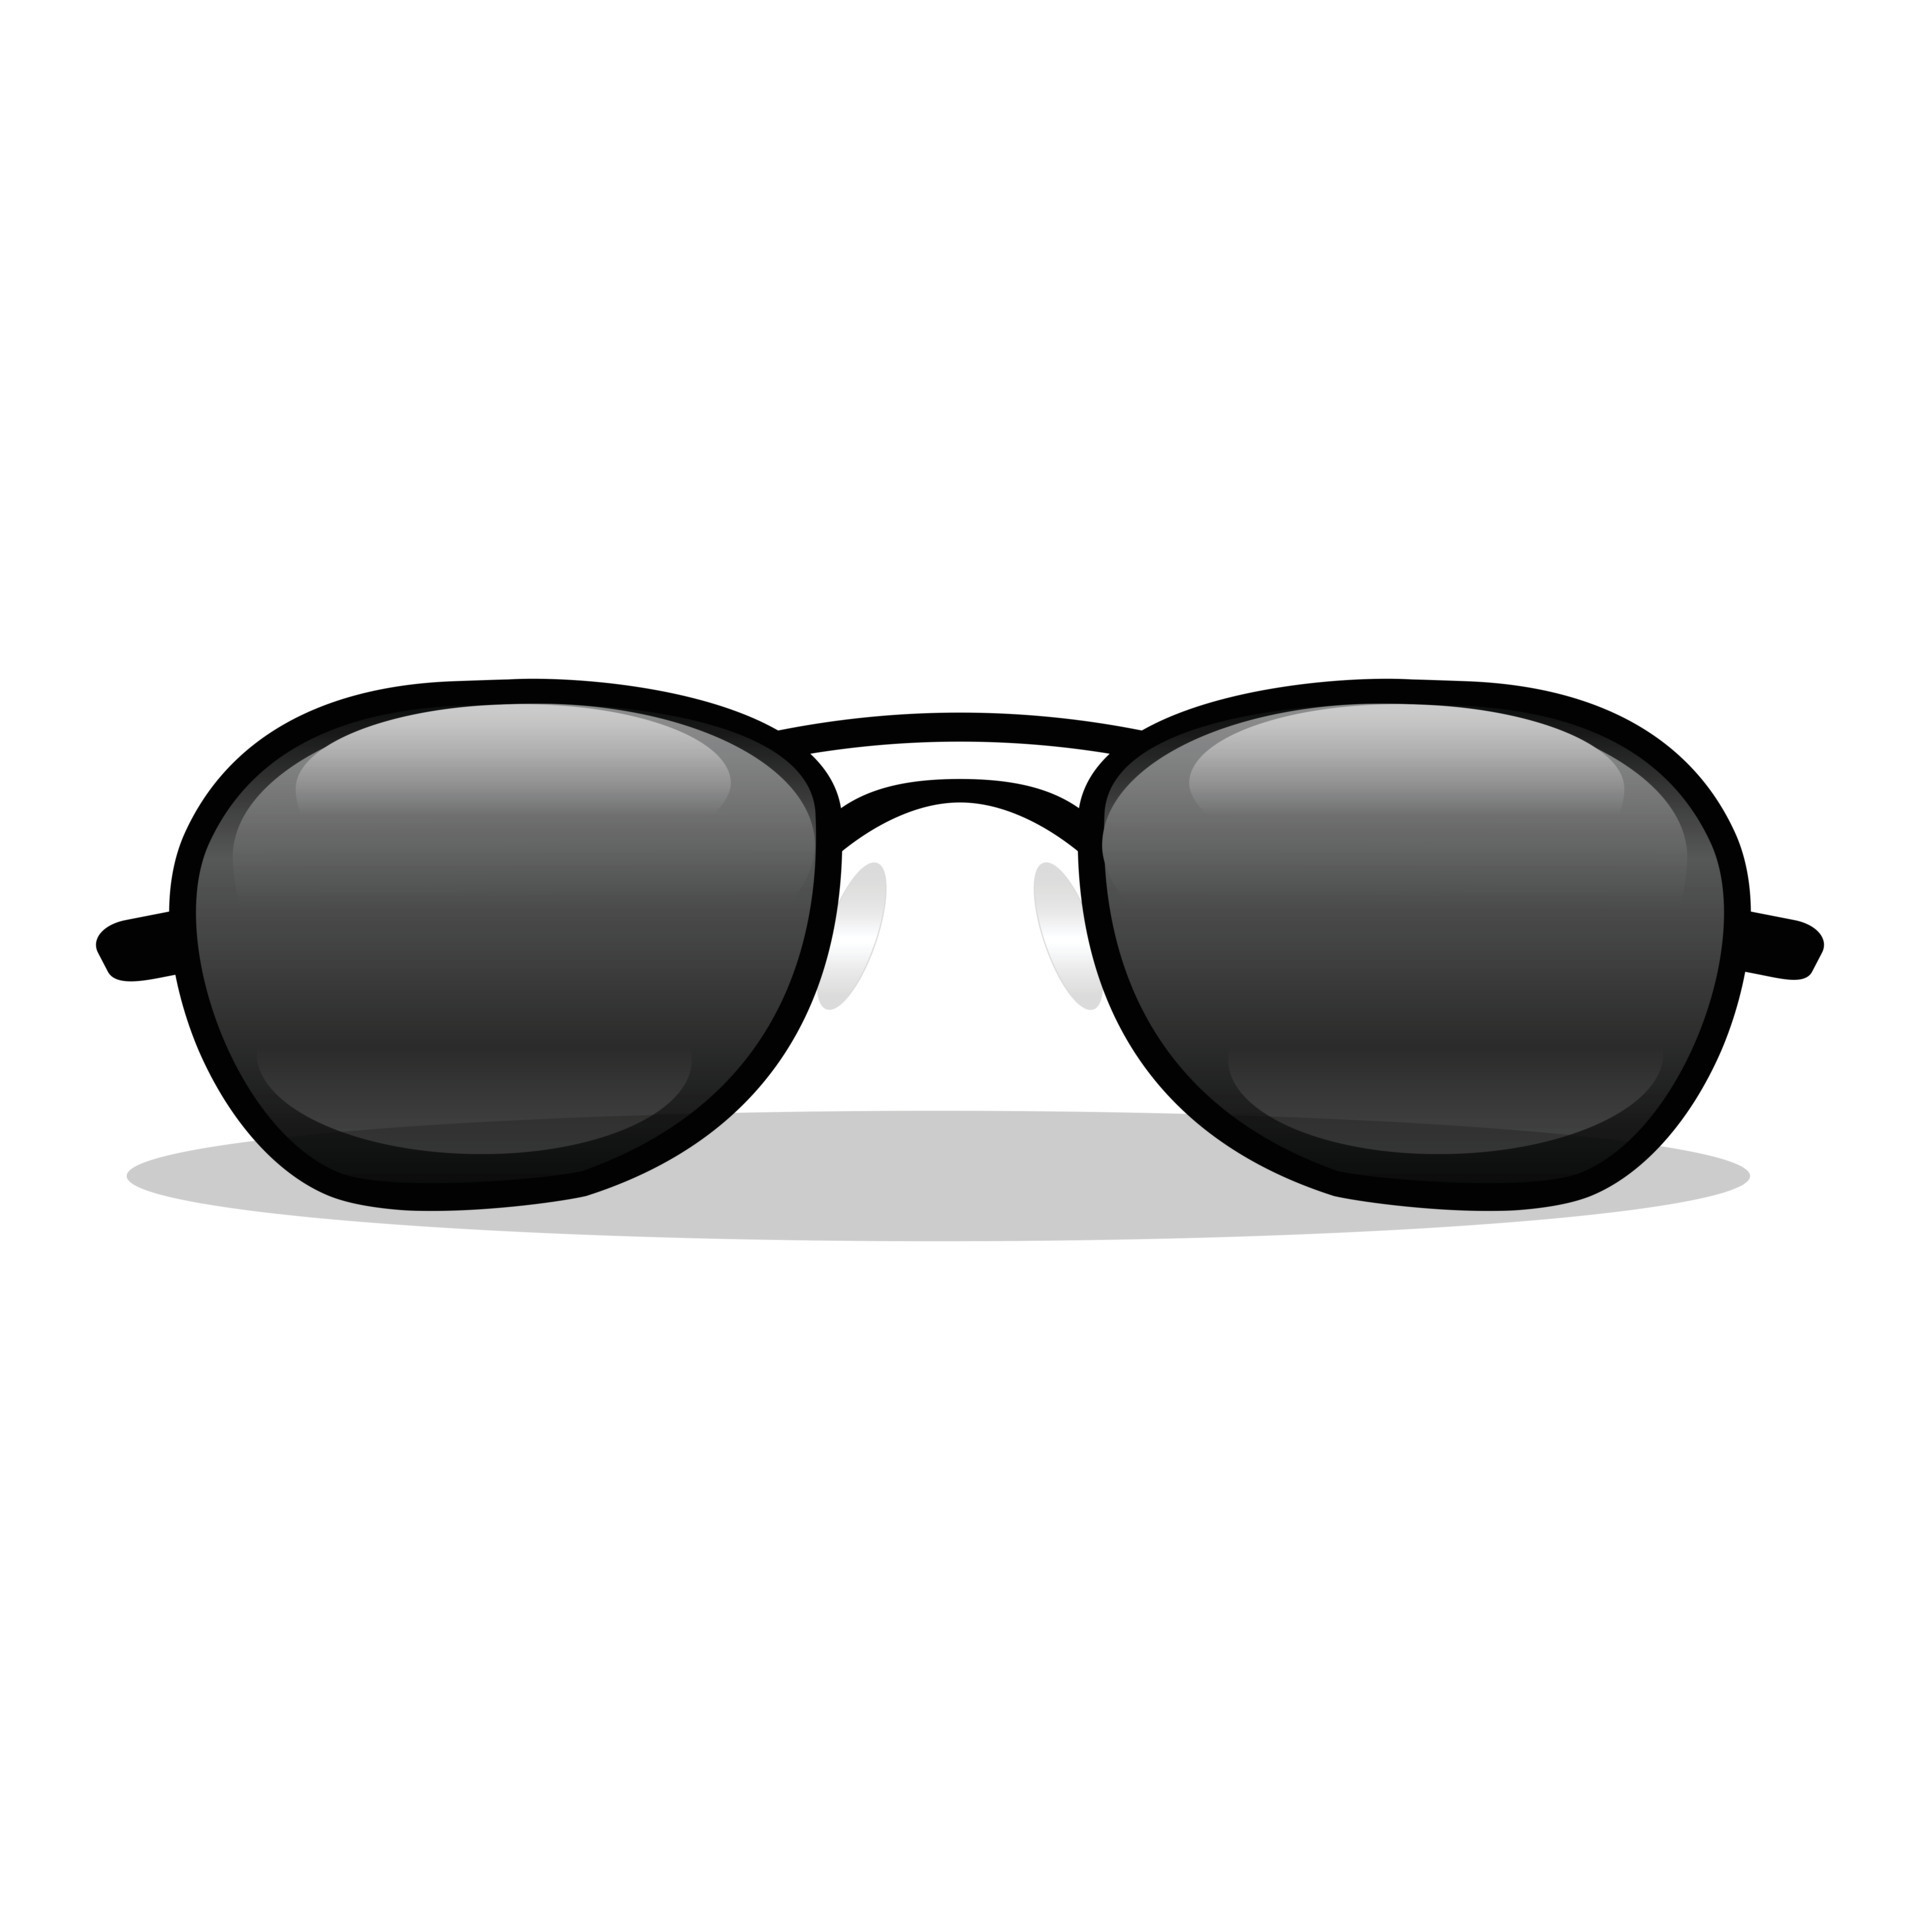 Police glasses icon cartoon vector. Officer sunglasses 14988744 Vector ...